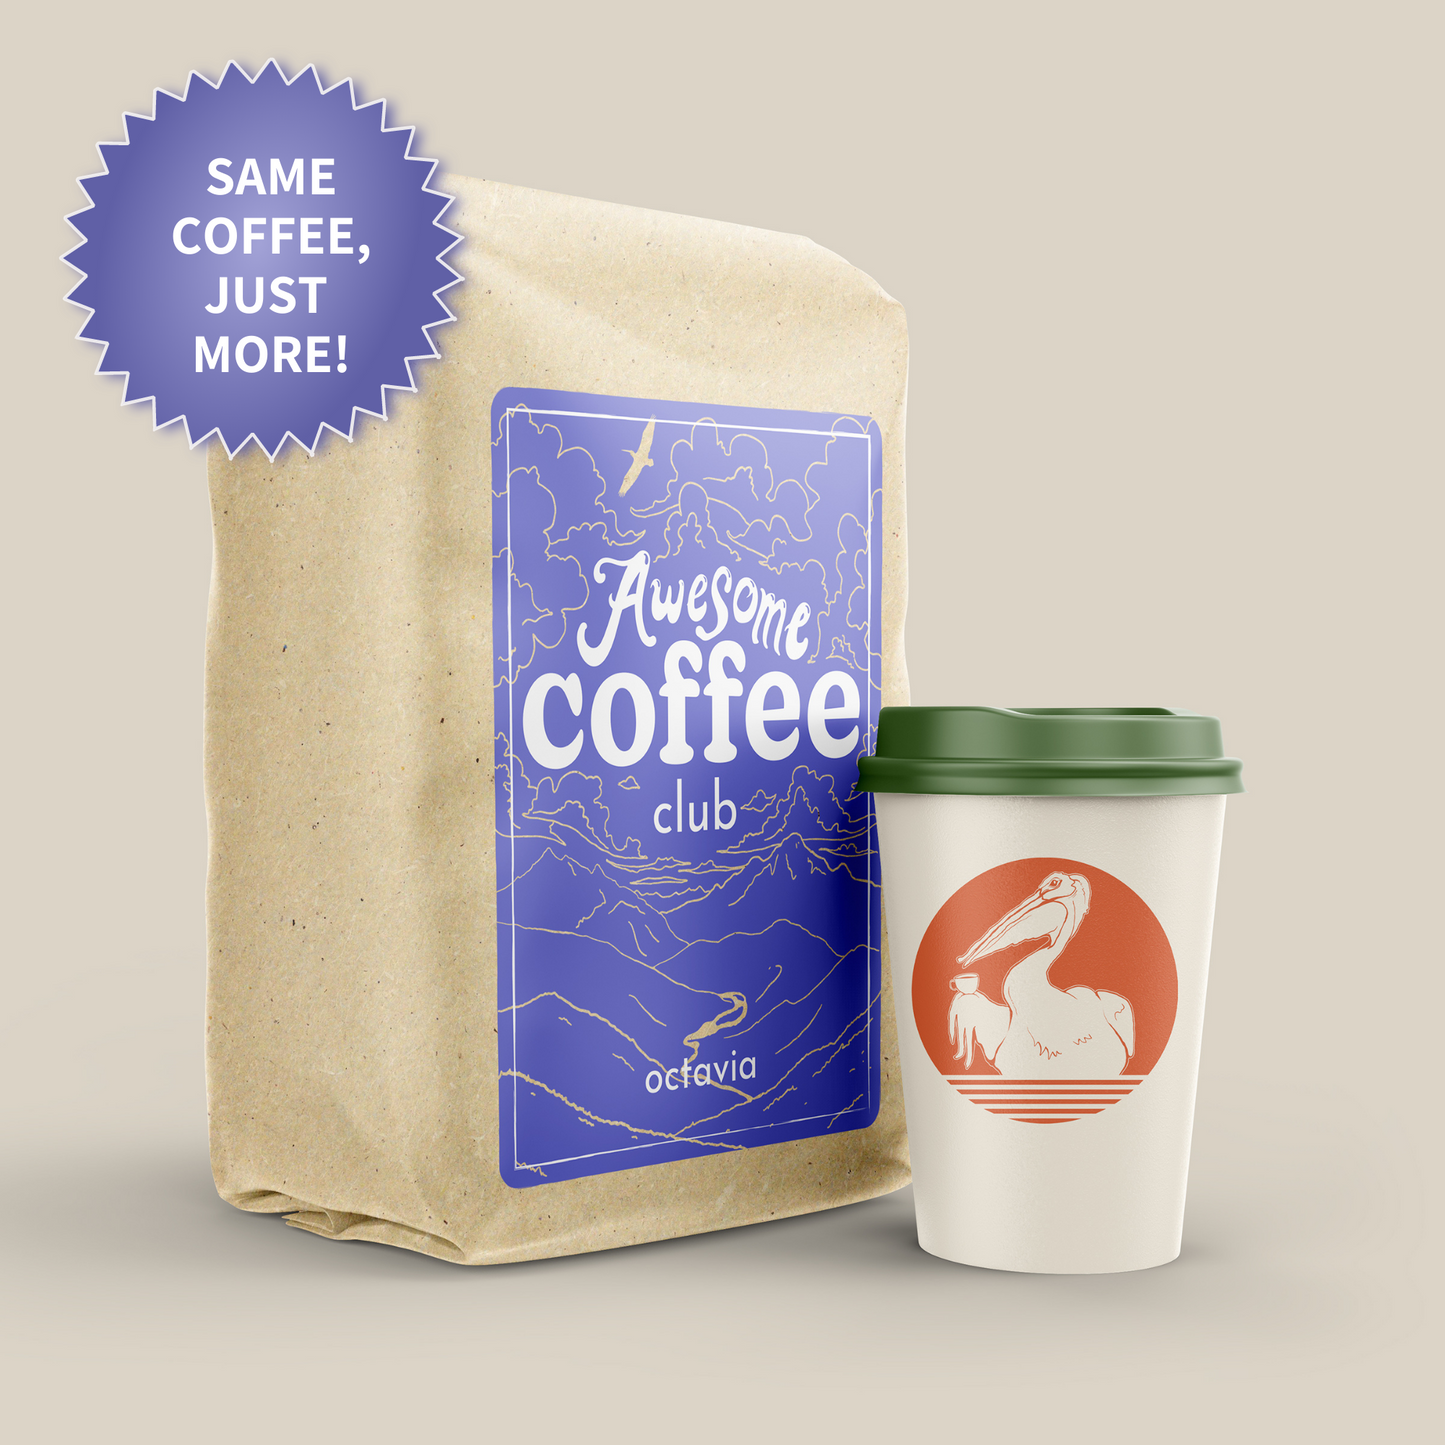 A large brown bag with a purple label on the front that reads "Awesome Coffee Club; Octavia". There is a white to go coffee mug next to it with a green lid and an orange pelican badge. There is also  a badge is the upper left corner that reads "Same coffee; just more". 